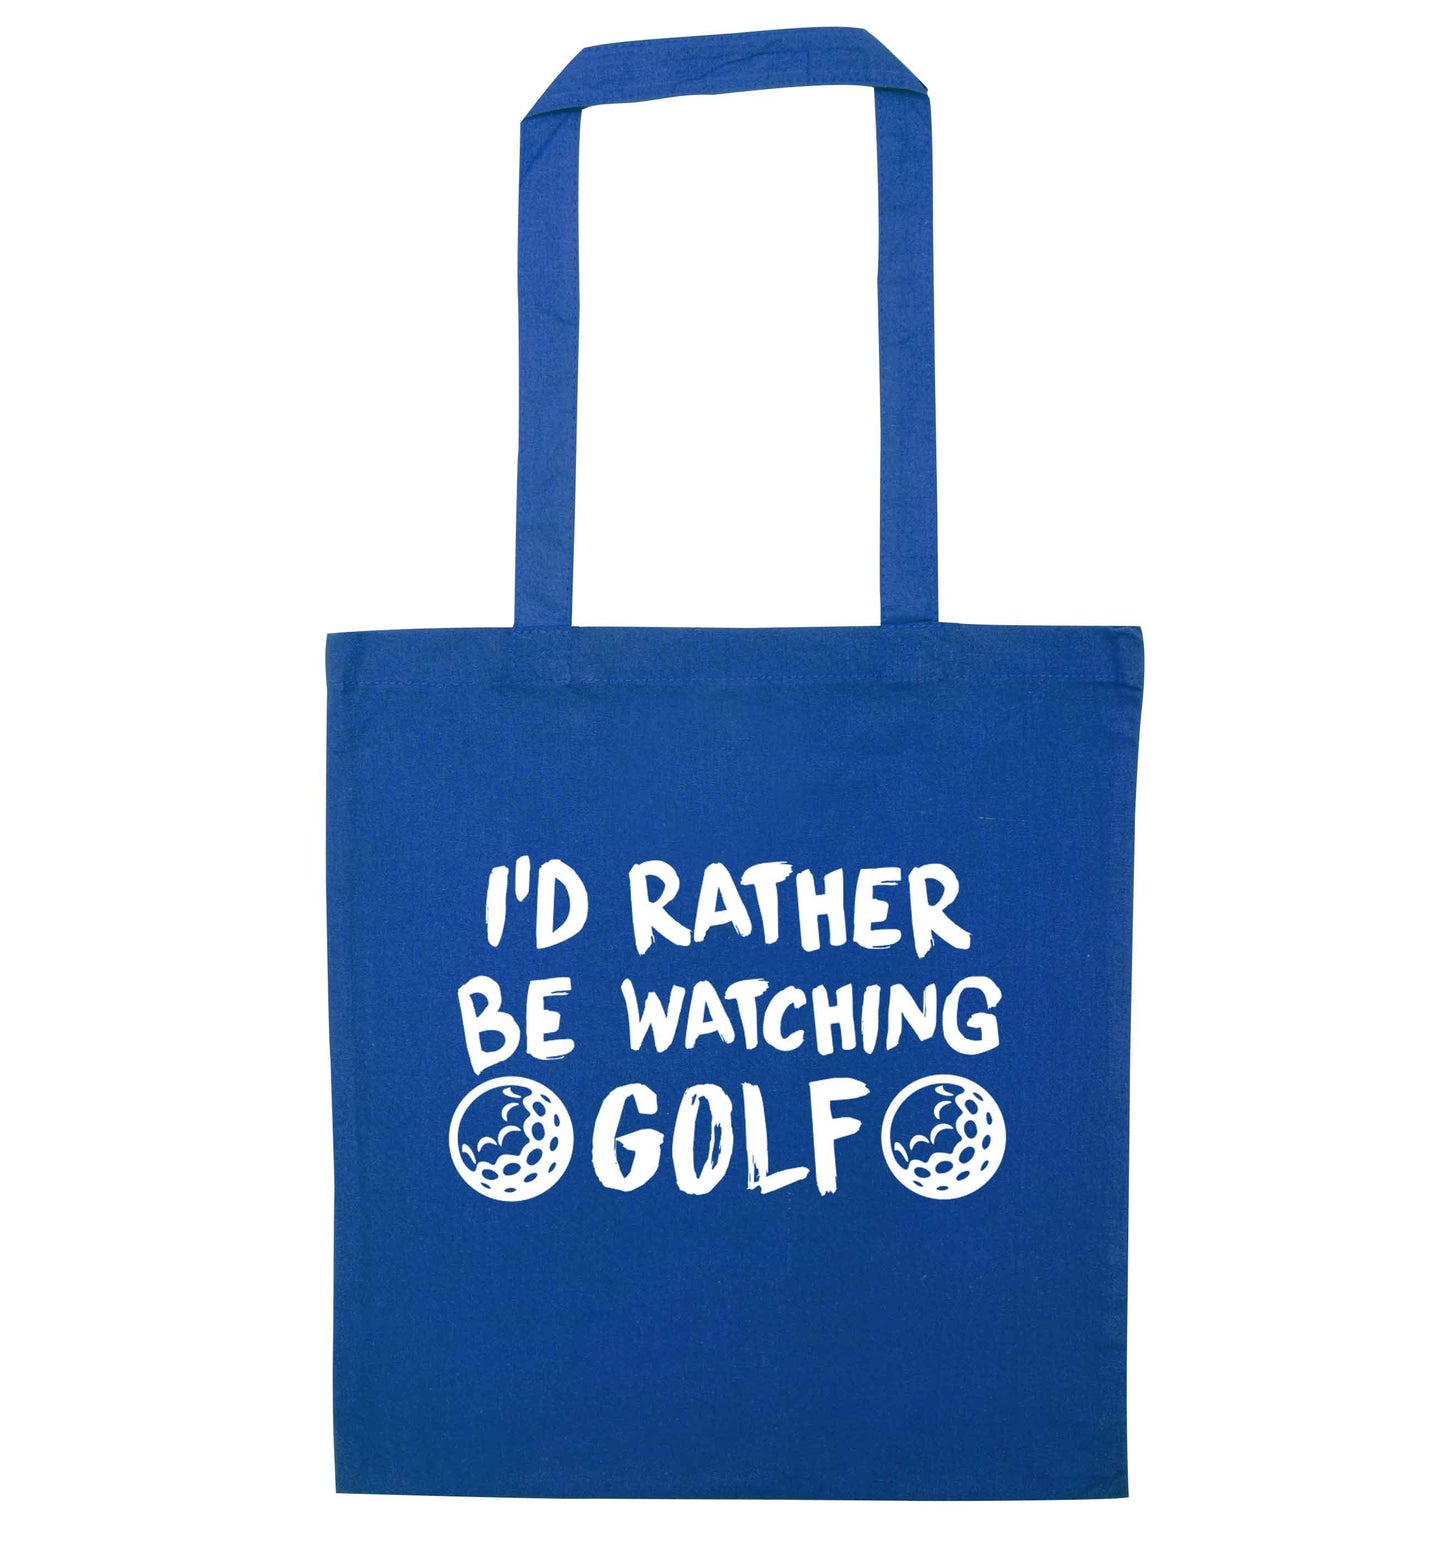 I'd rather be watching golf blue tote bag